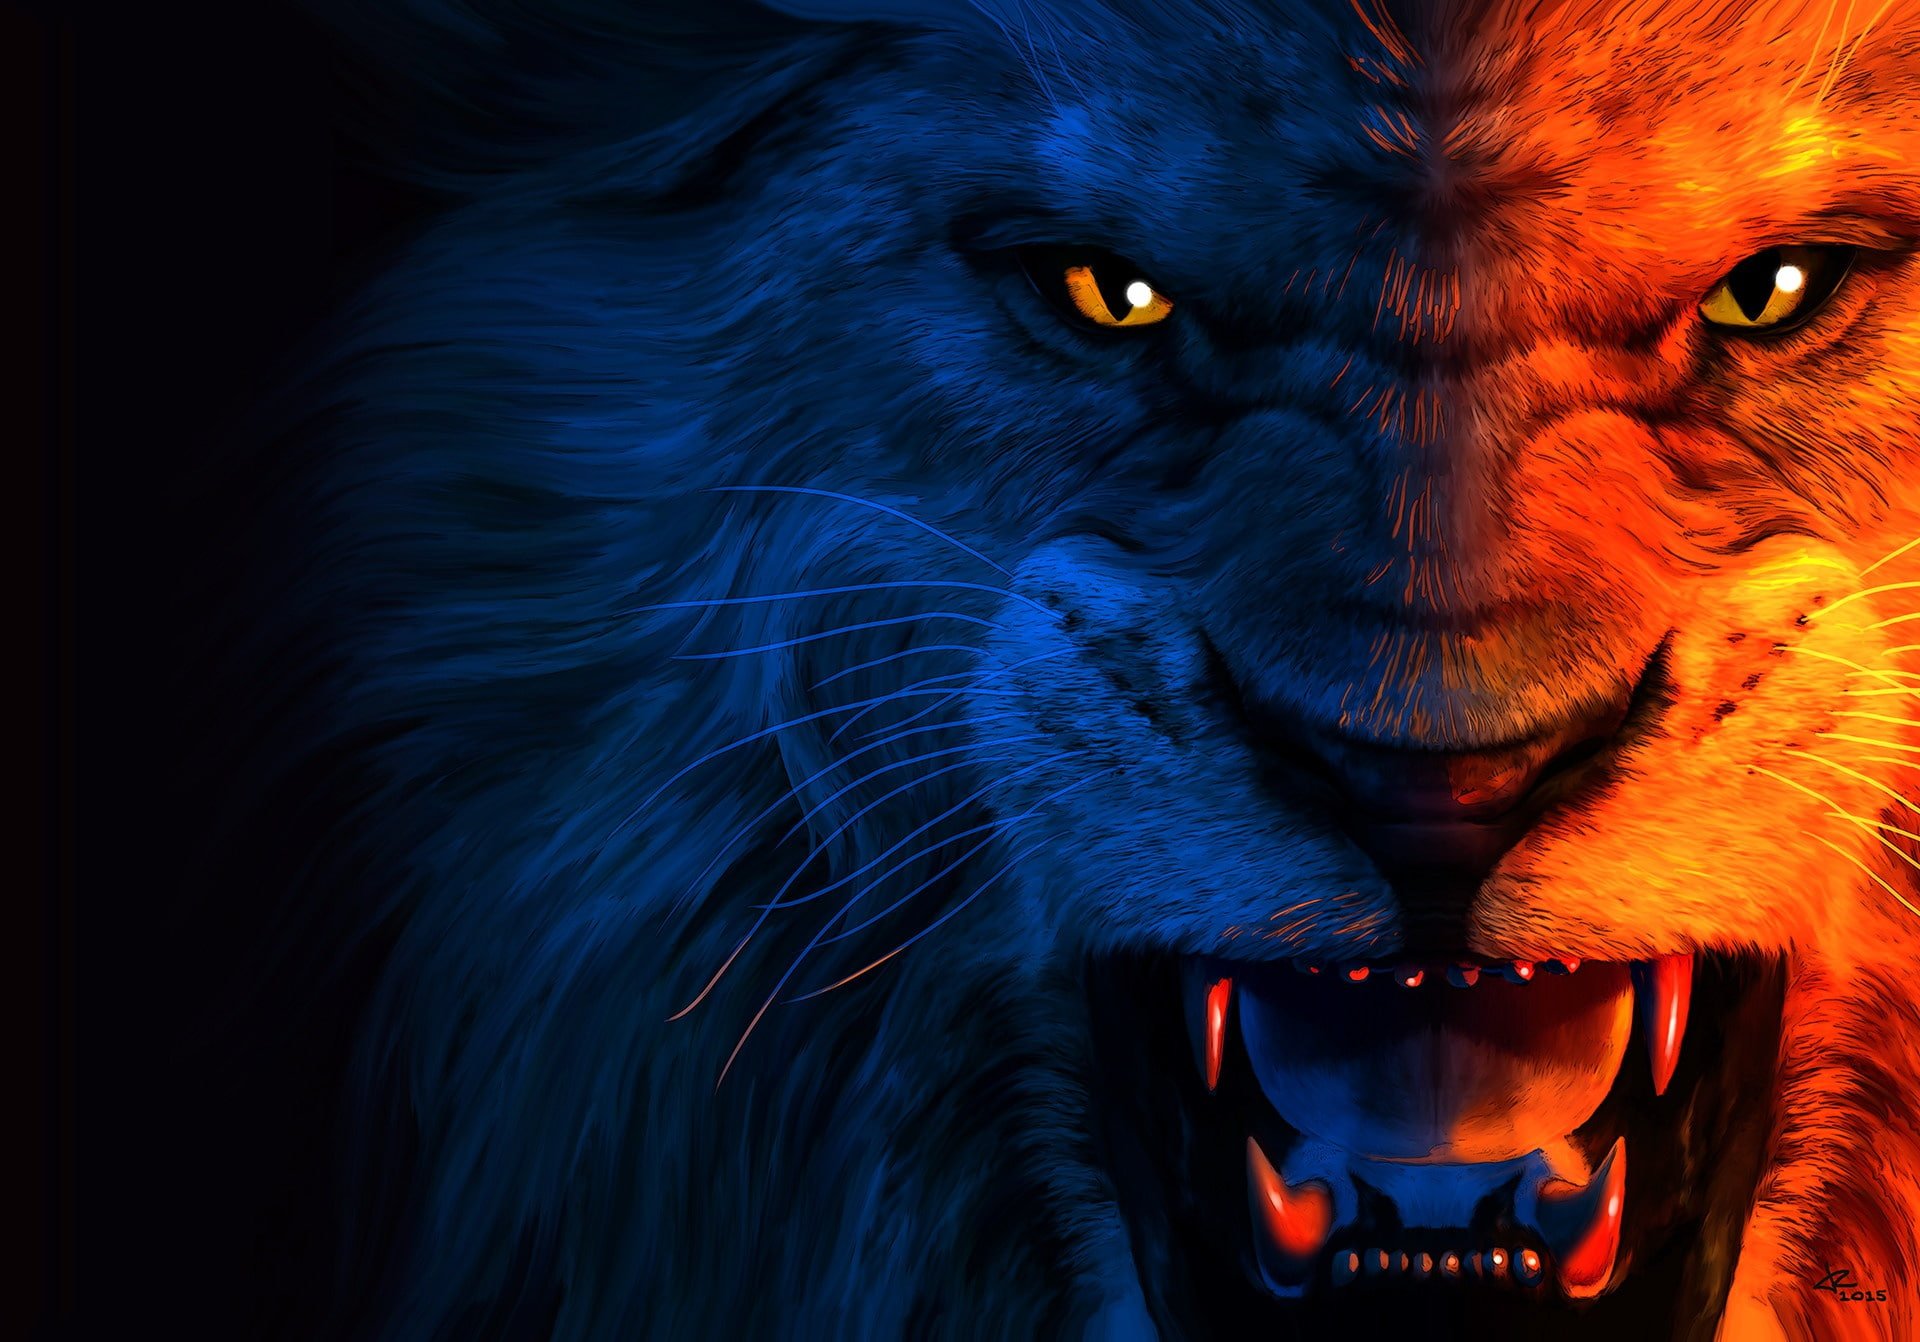 24171 Angry Lion Images Stock Photos  Vectors  Shutterstock